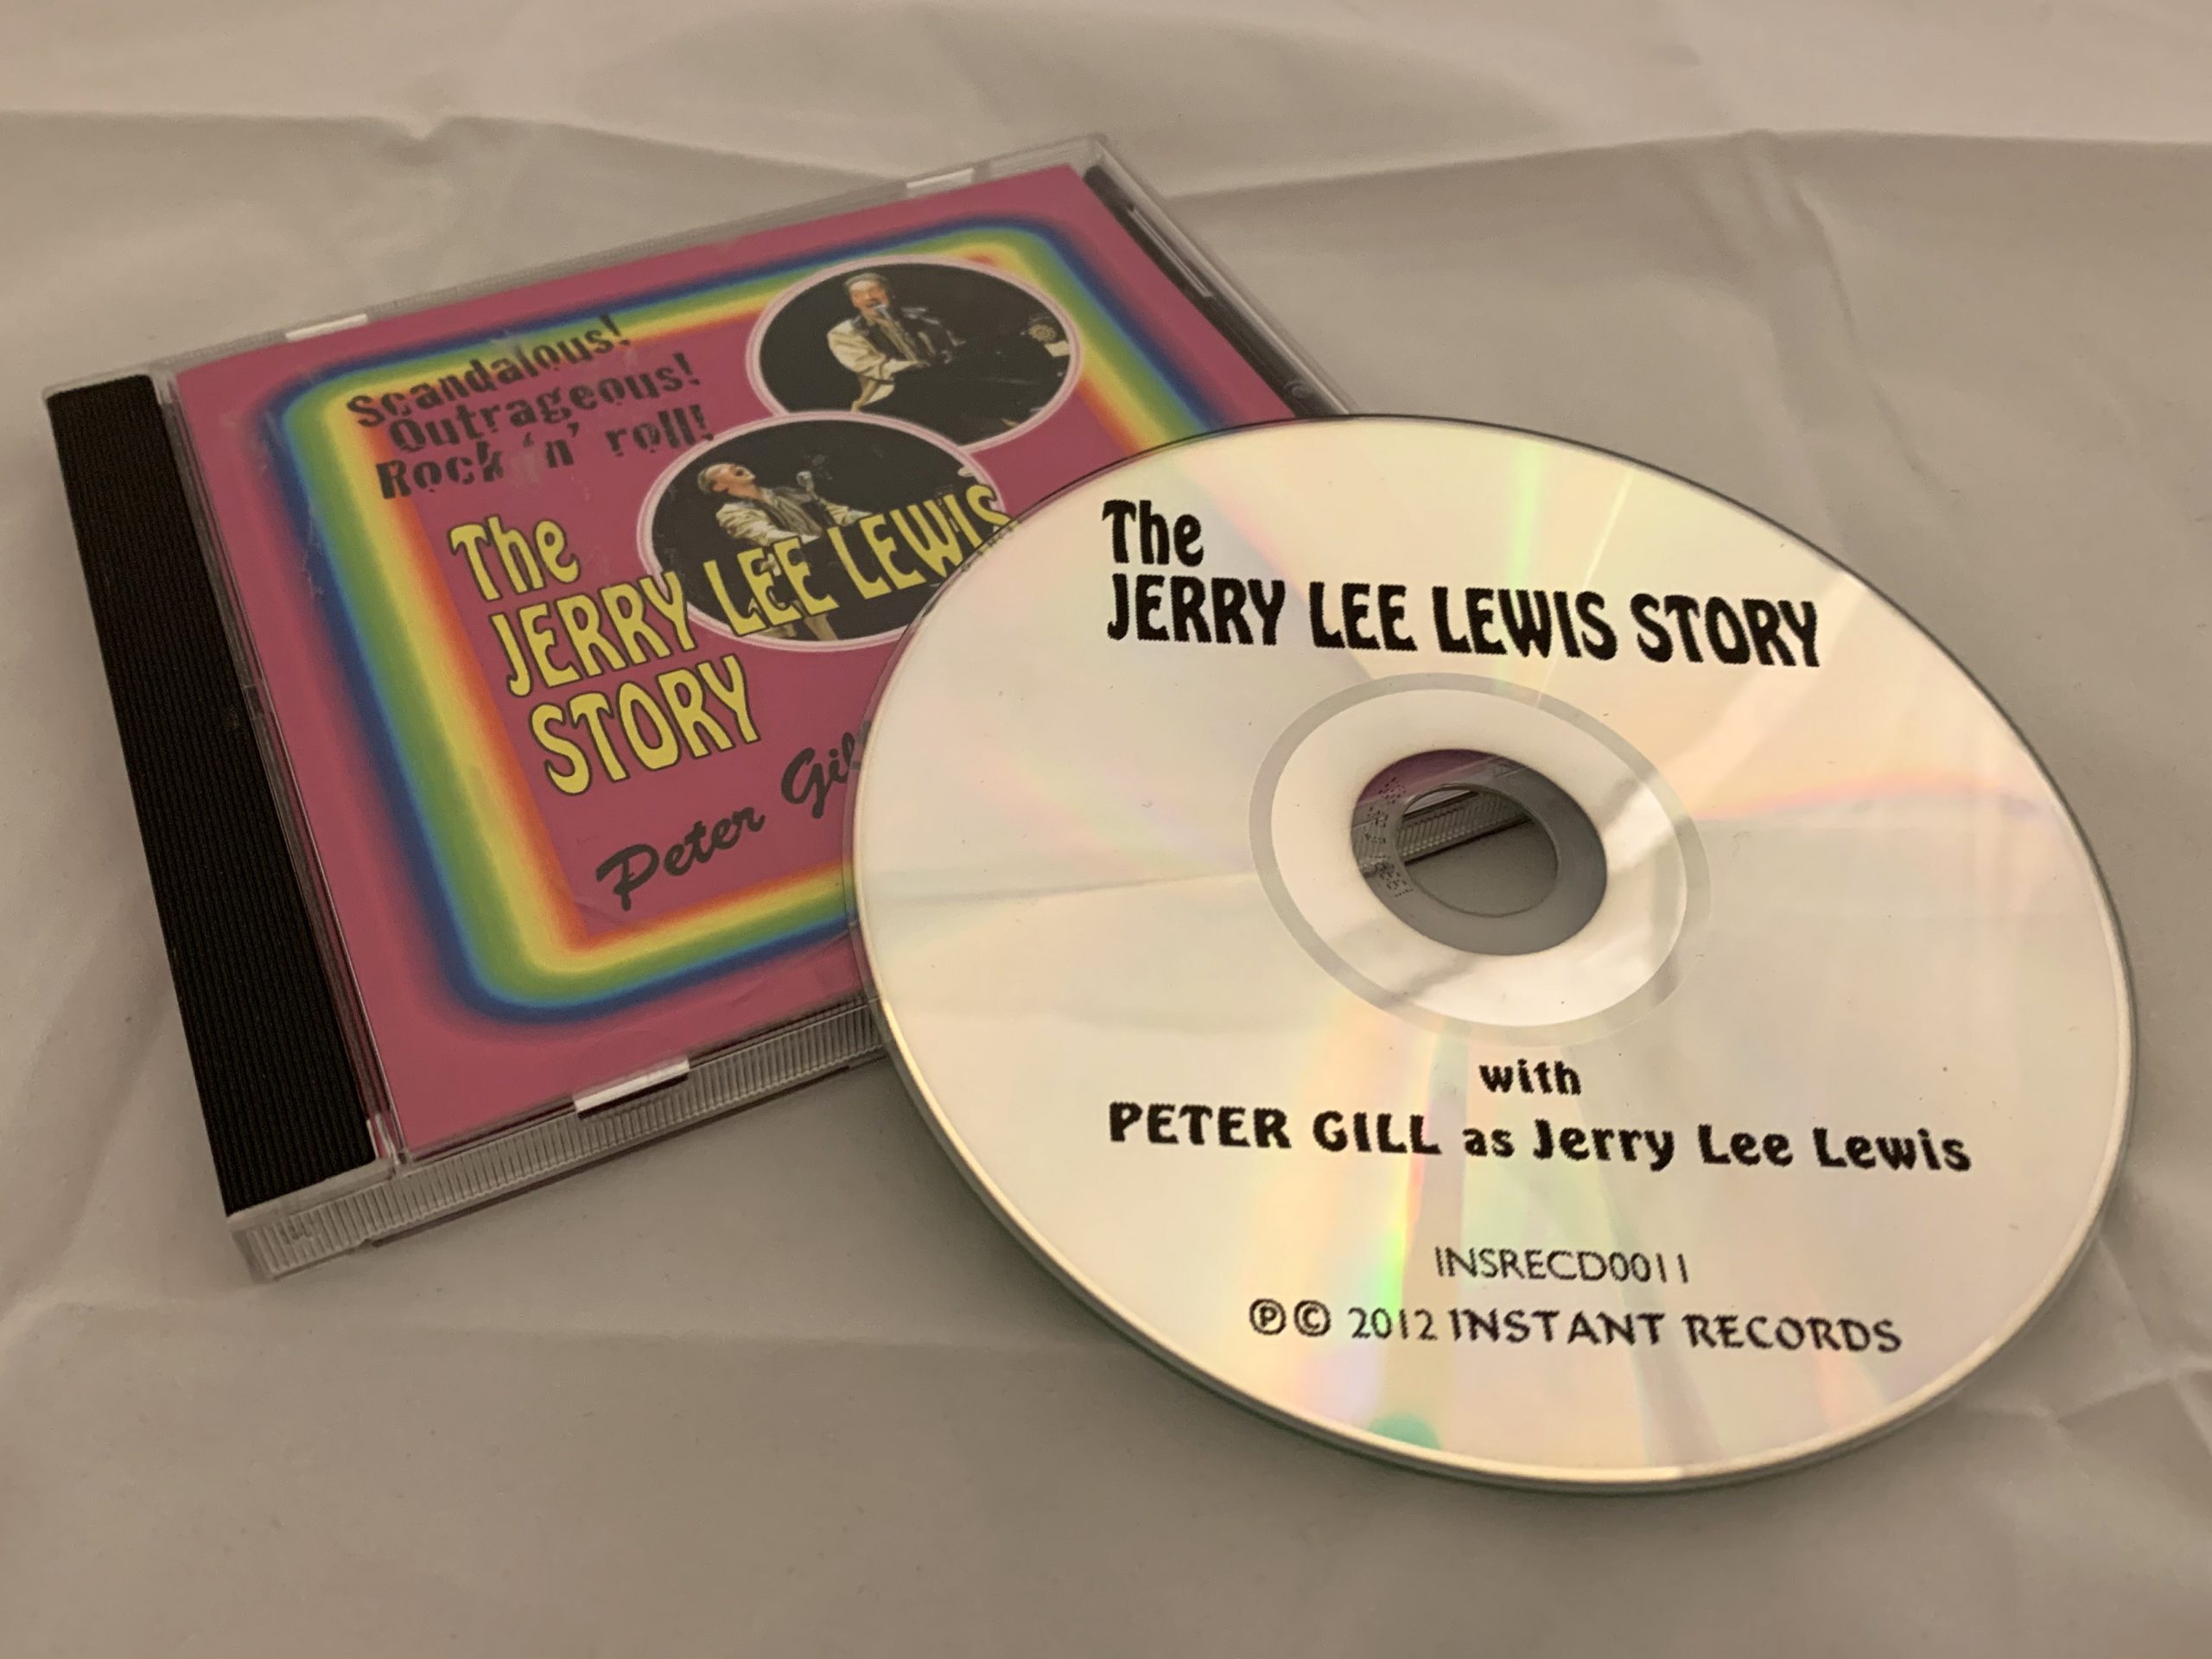 The Jerry Lee Lewis Story CD – Peter Gill